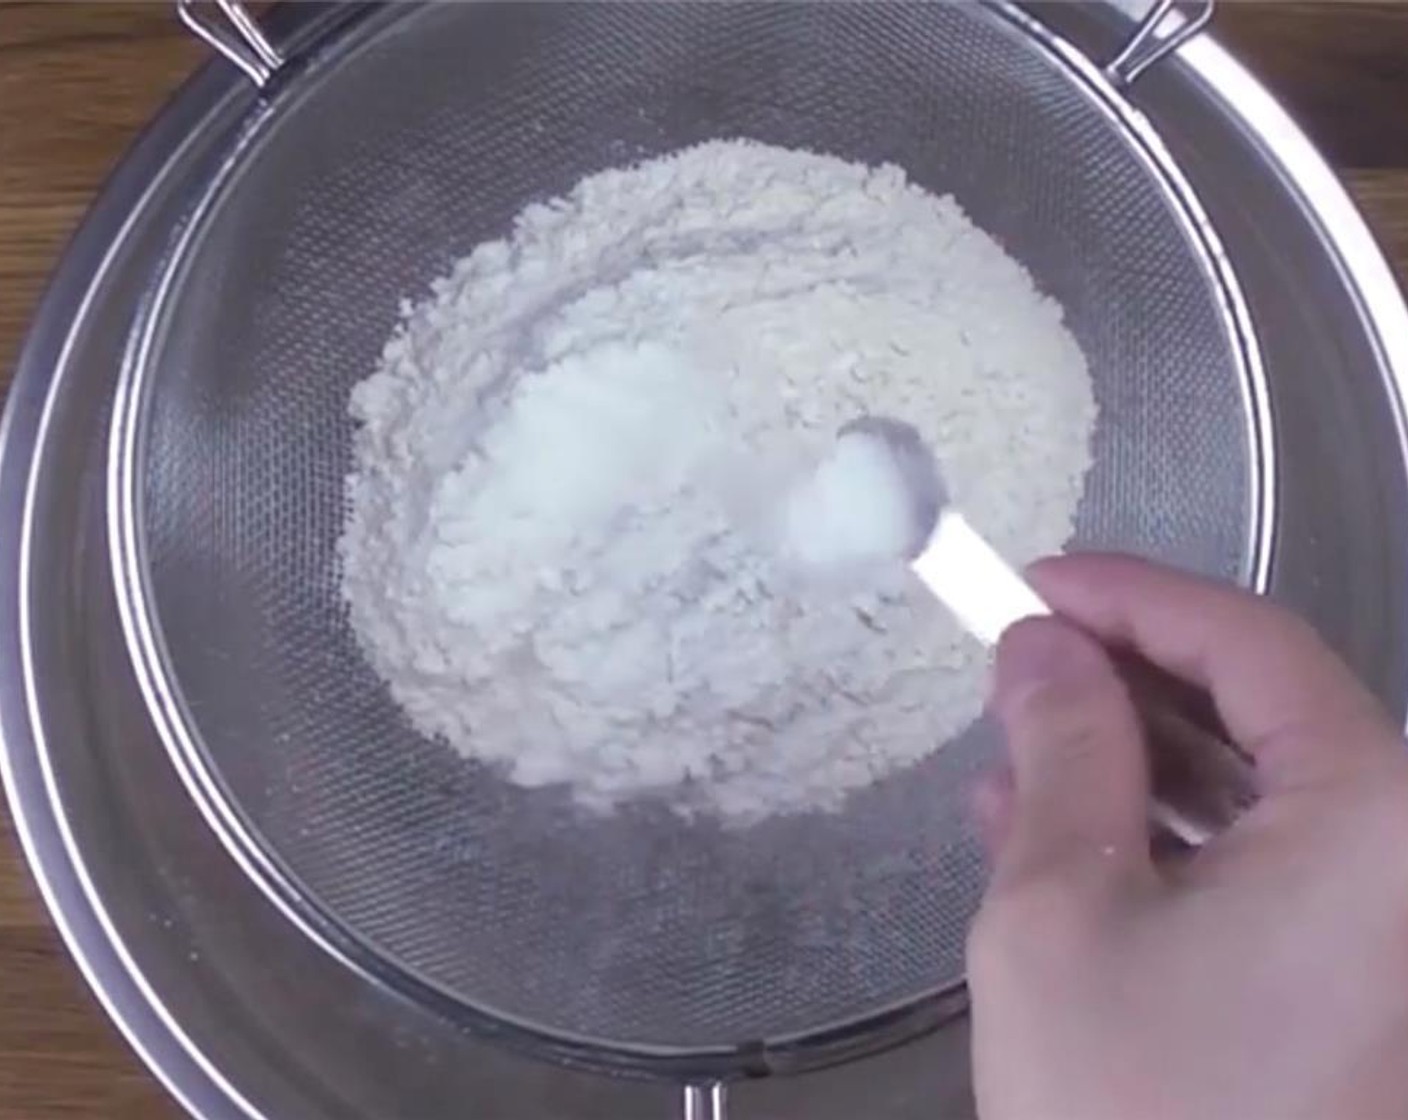 step 1 Sift All-Purpose Flour (1 cup), Baking Powder (1/2 Tbsp), and Sea Salt (1/4 tsp) into a large mixing bowl. Mix well with a wooden spoon.